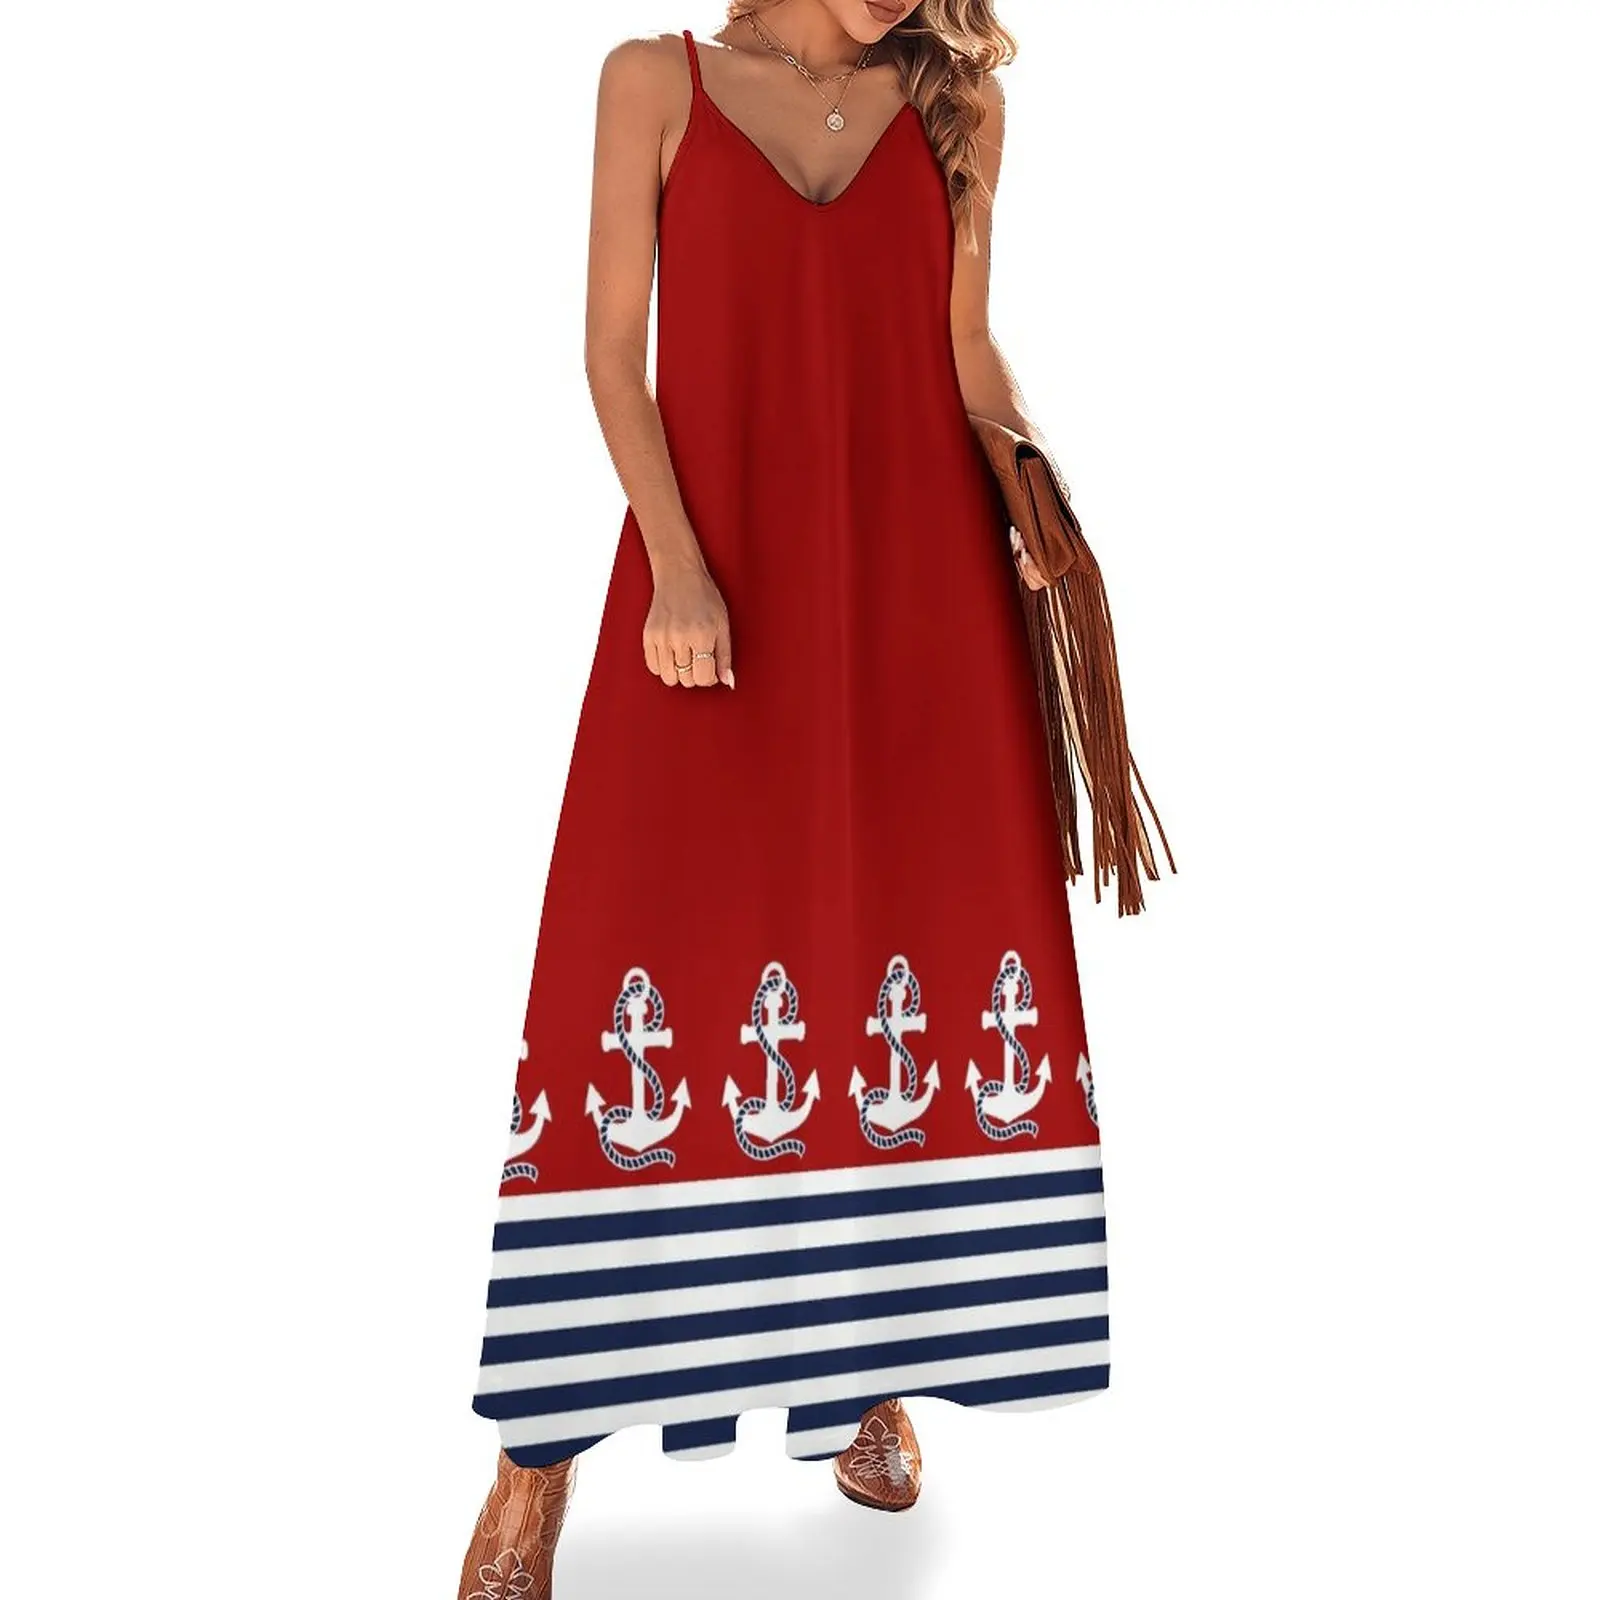 

Nautical red white stripes and blue anchors on red background Sleeveless Dress Female clothing dresses for women